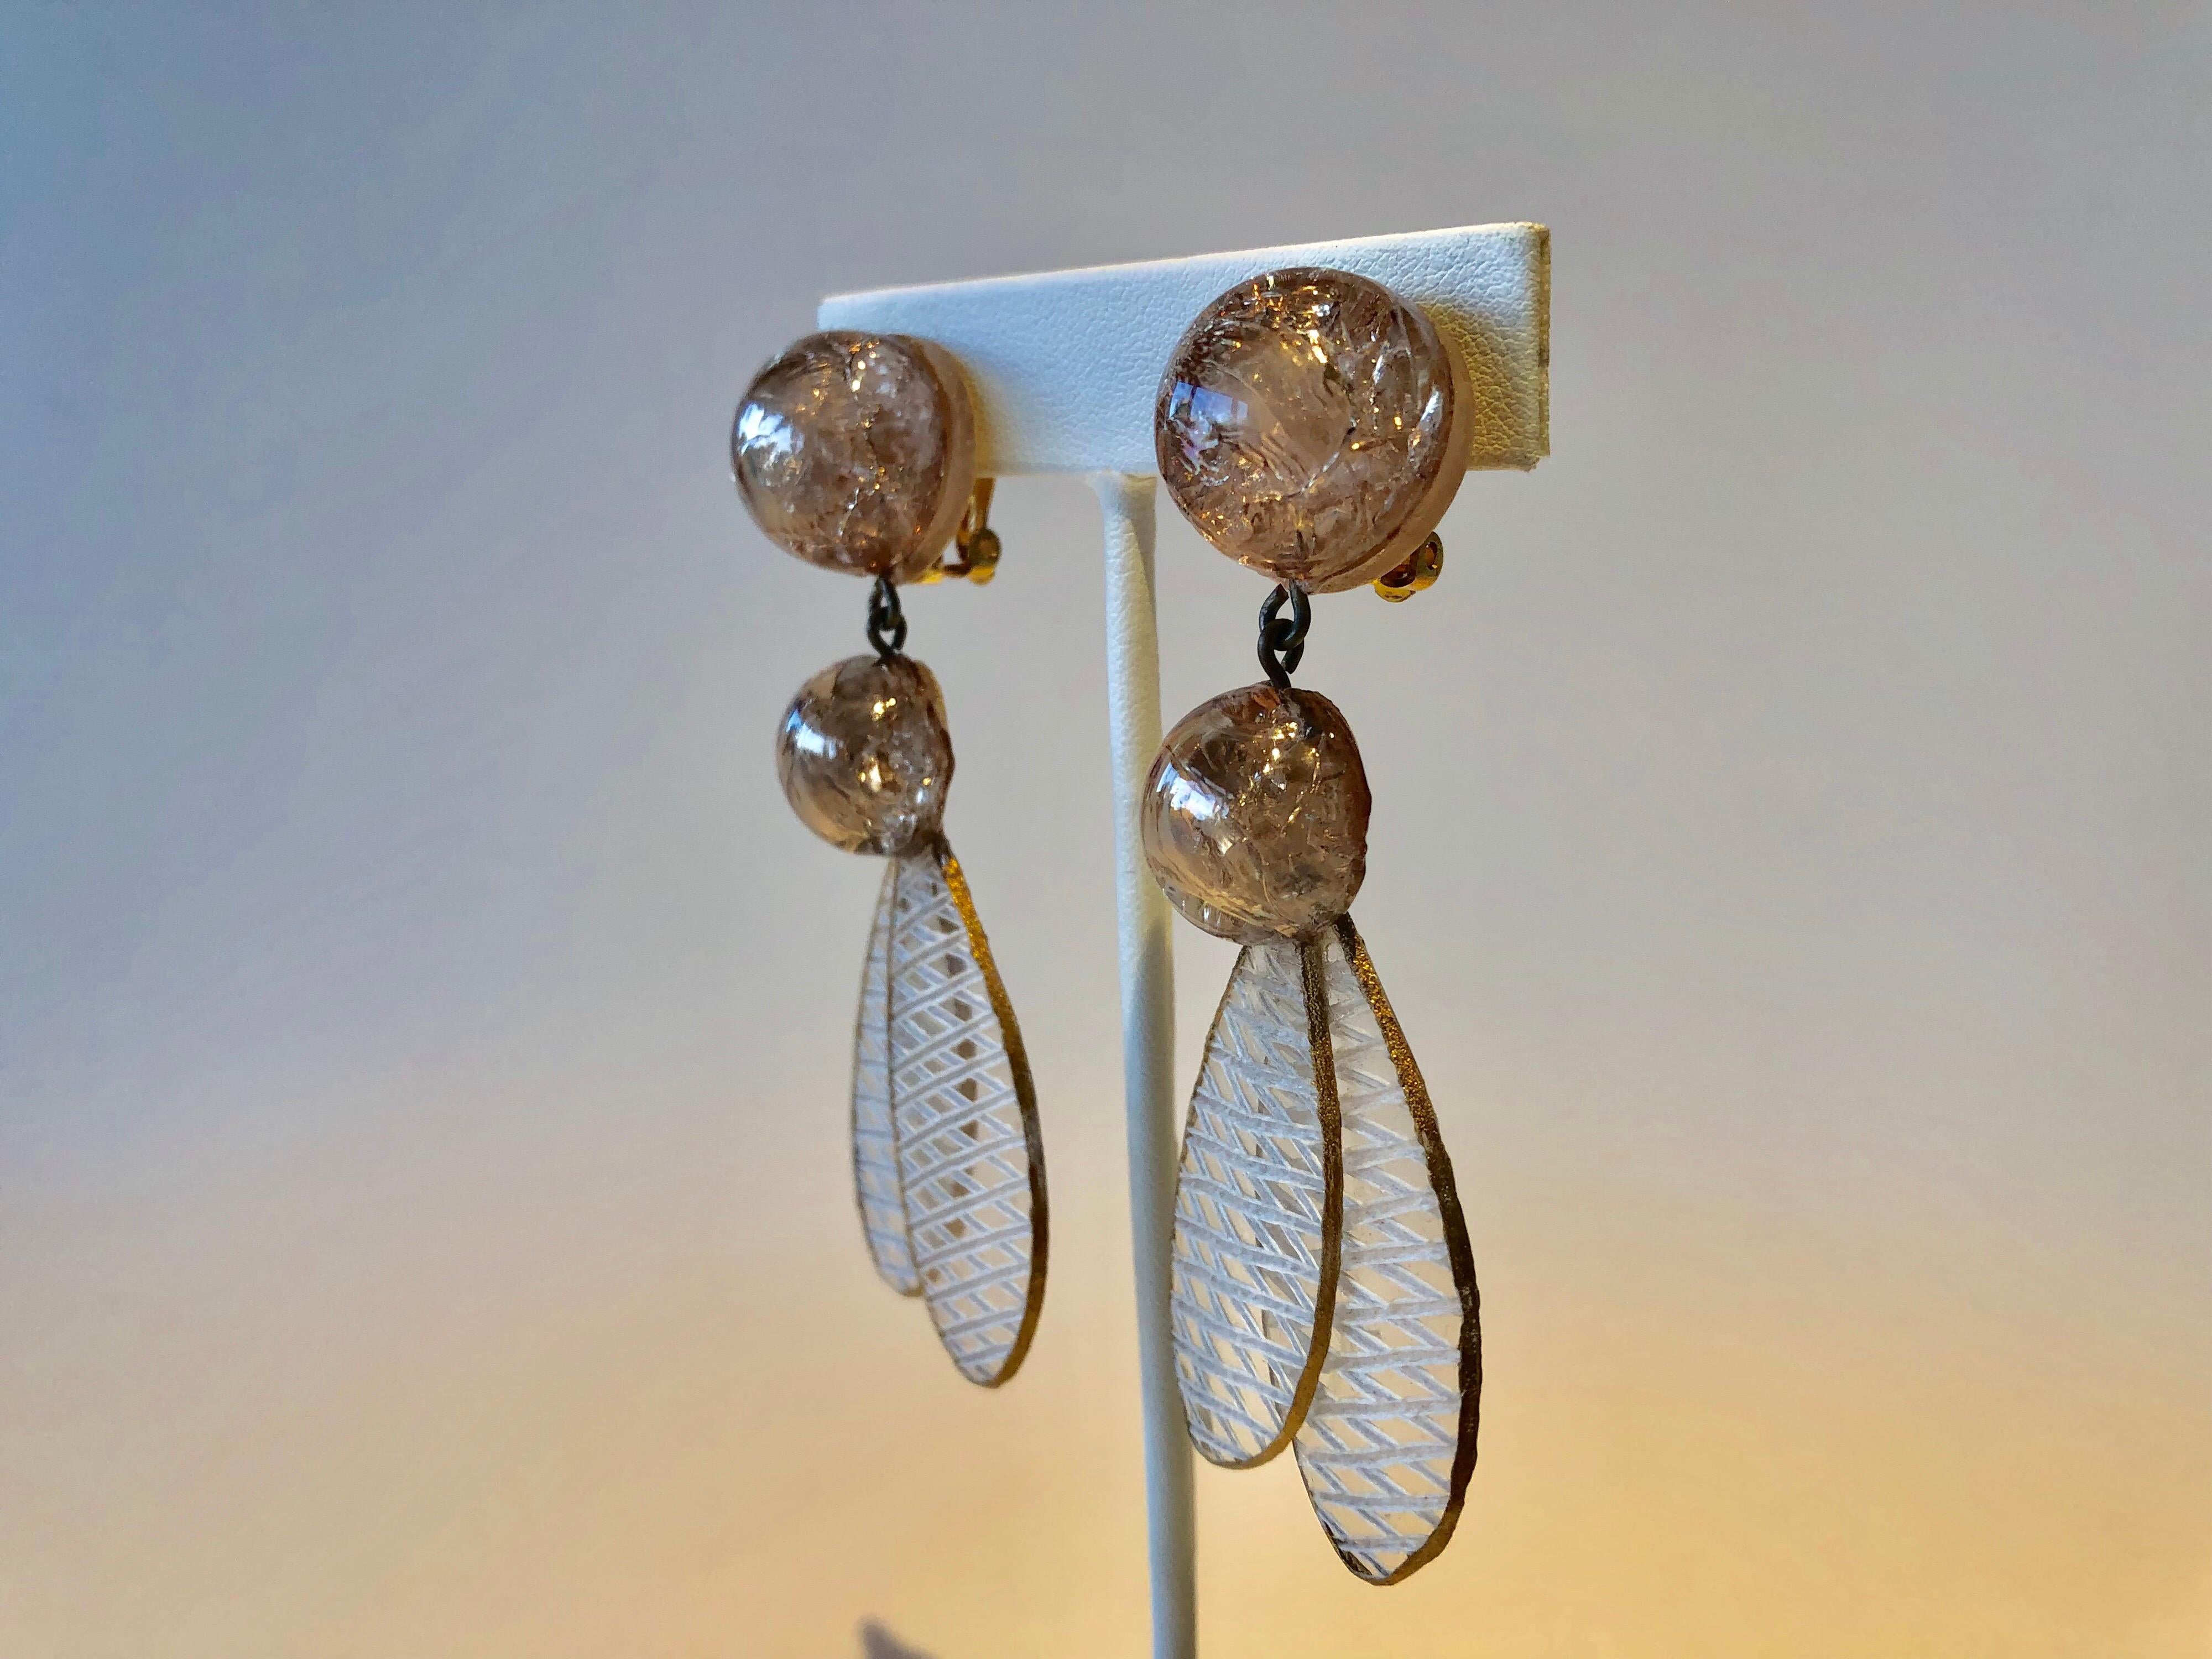 Light and easy to wear, this handmade pair of artisanal earrings was made in Paris by Cilea. The earrings are comprised of champagne color enameline (resin and enamel composite) and depict dragonfly wings. Throughout the clip-on earrings you can see